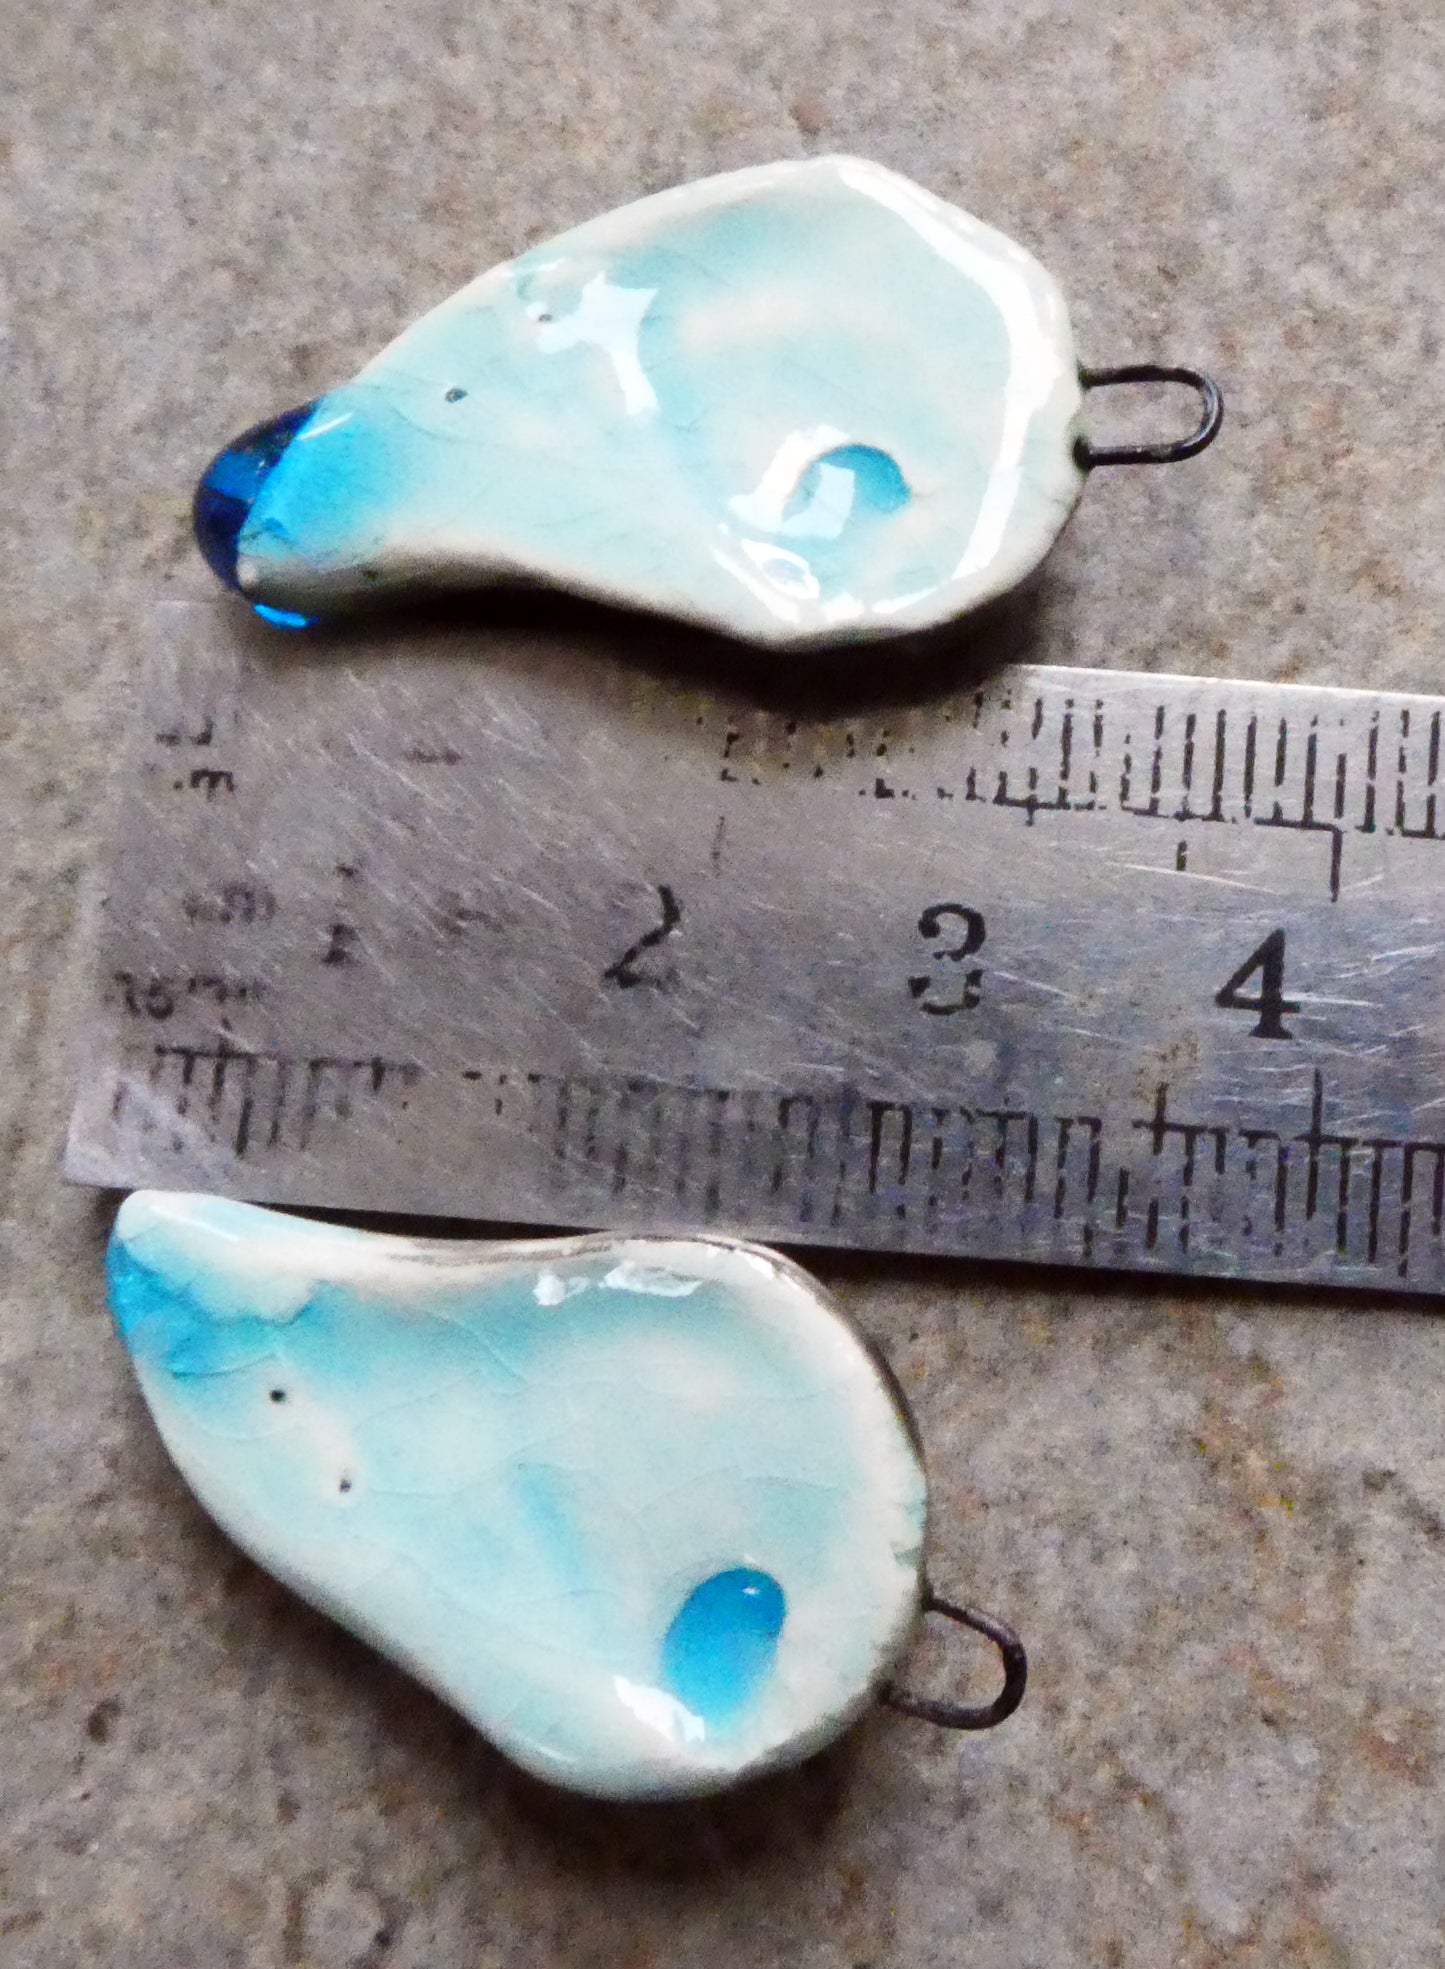 Ceramic Abalone Textured Shell Charms -Metallic and Turquoise Crackle